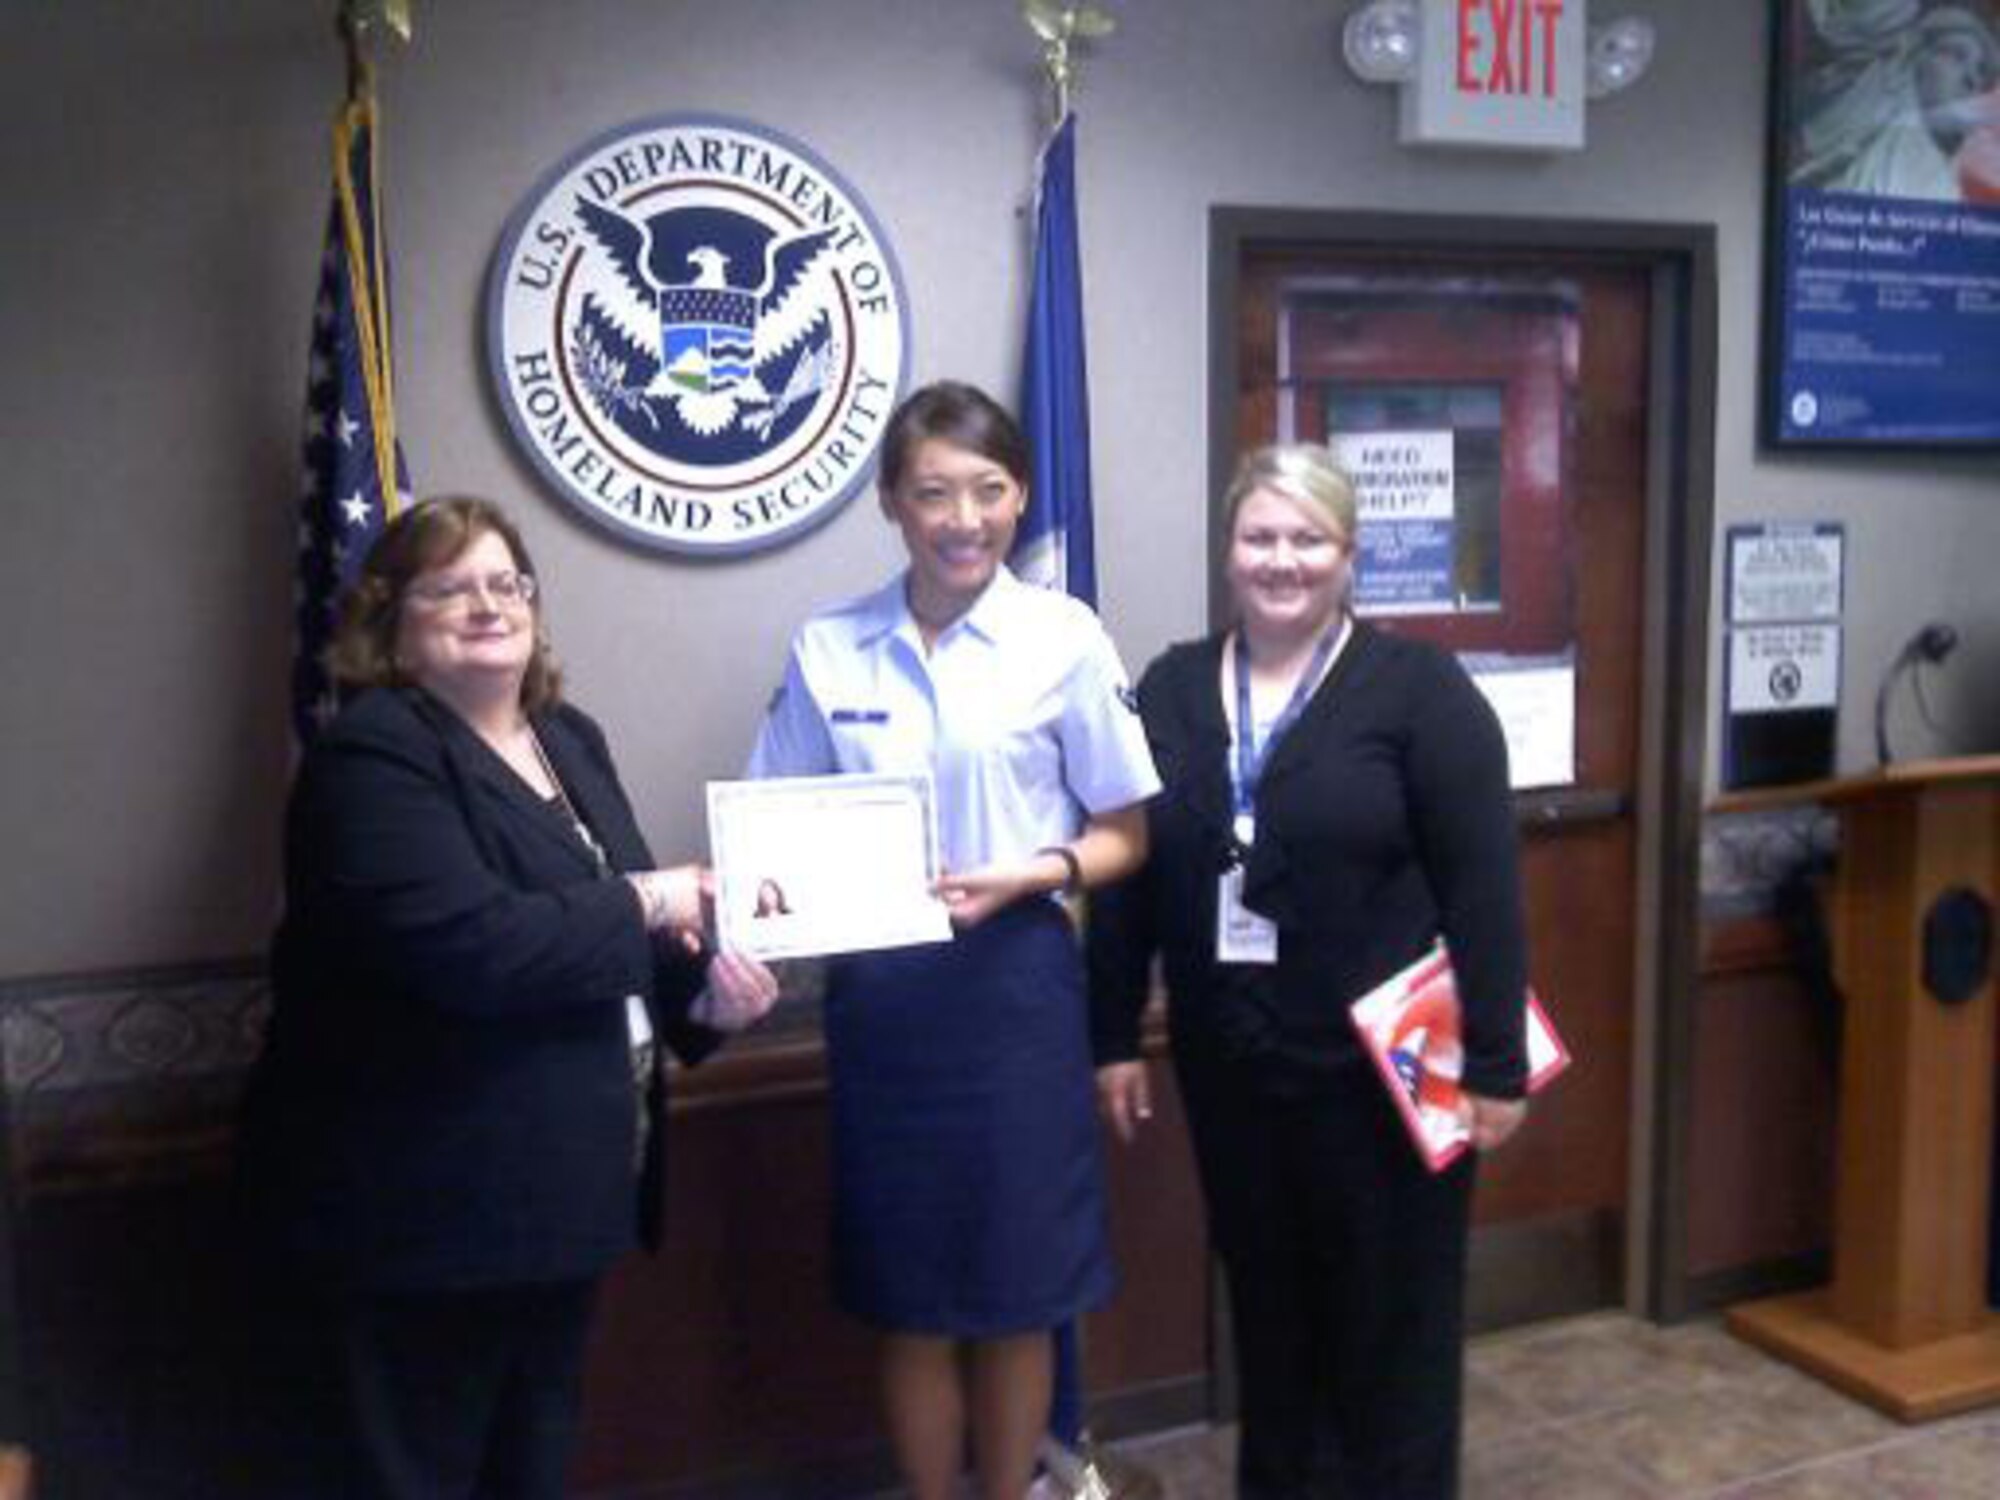 Airman Zhe “Kat” Tan poses for a photo while displaying her United States Certificate of Naturalization. Airman Tan, an information manager with the 188th Maintenance Operations Flight since June 2009, became a United States citizen Aug. 22, 2011. She relocated to the United States from Tian Jin, China, in 2004 and joined the 188th Fighter Wing five years later. (Courtesy photo)